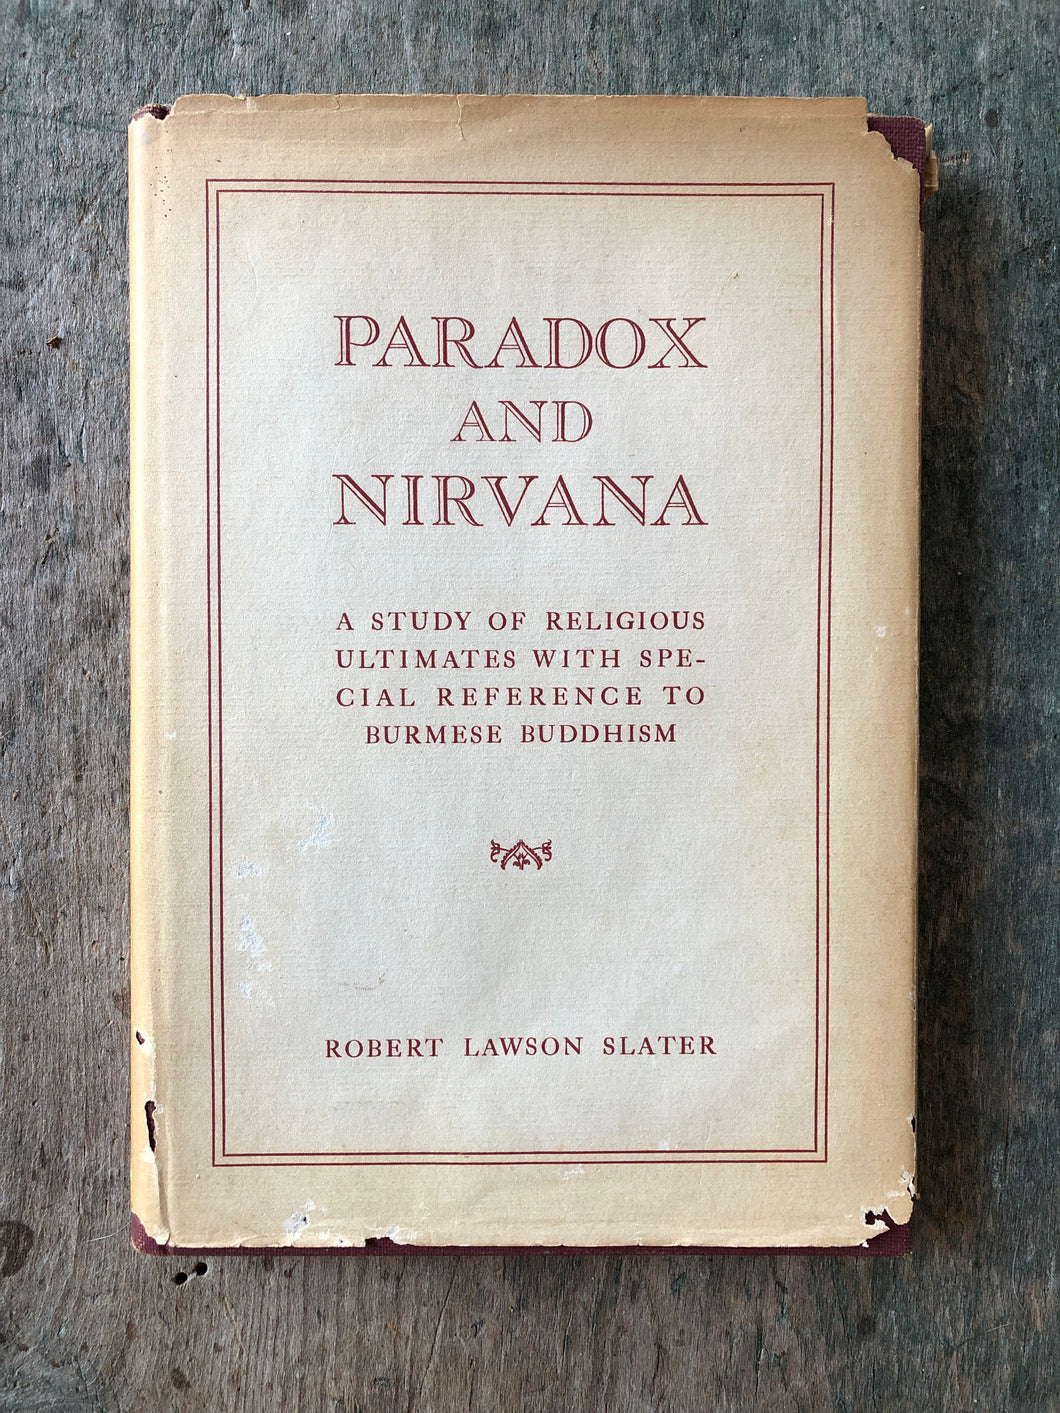 Paradox and Nirvana: A Study of Religious Ultimates with Special Reference to Burmese Buddhism by Robert Lawson Slater